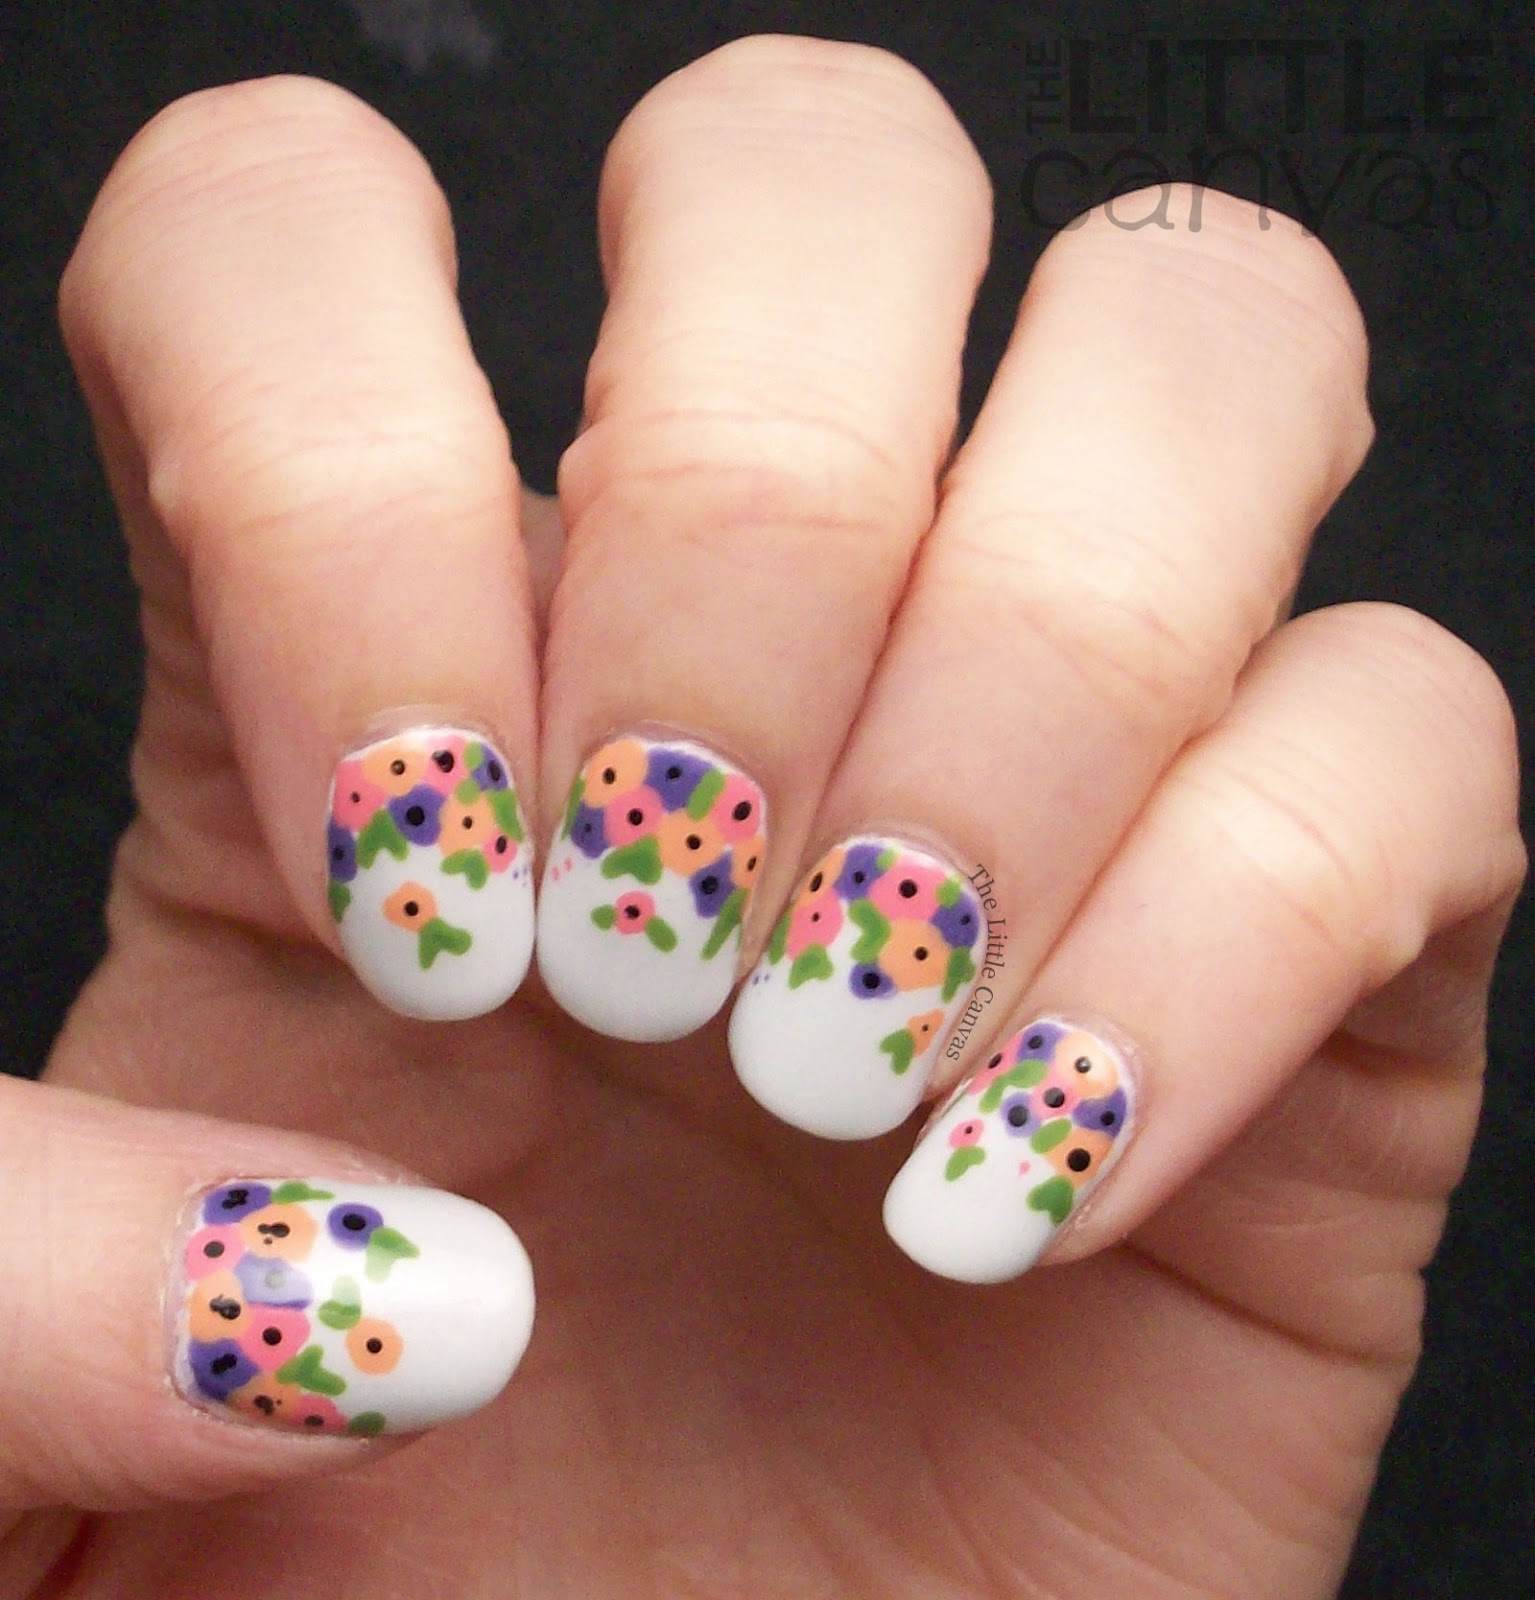 The One With Yet Another Floral Manicure - The Little Canvas